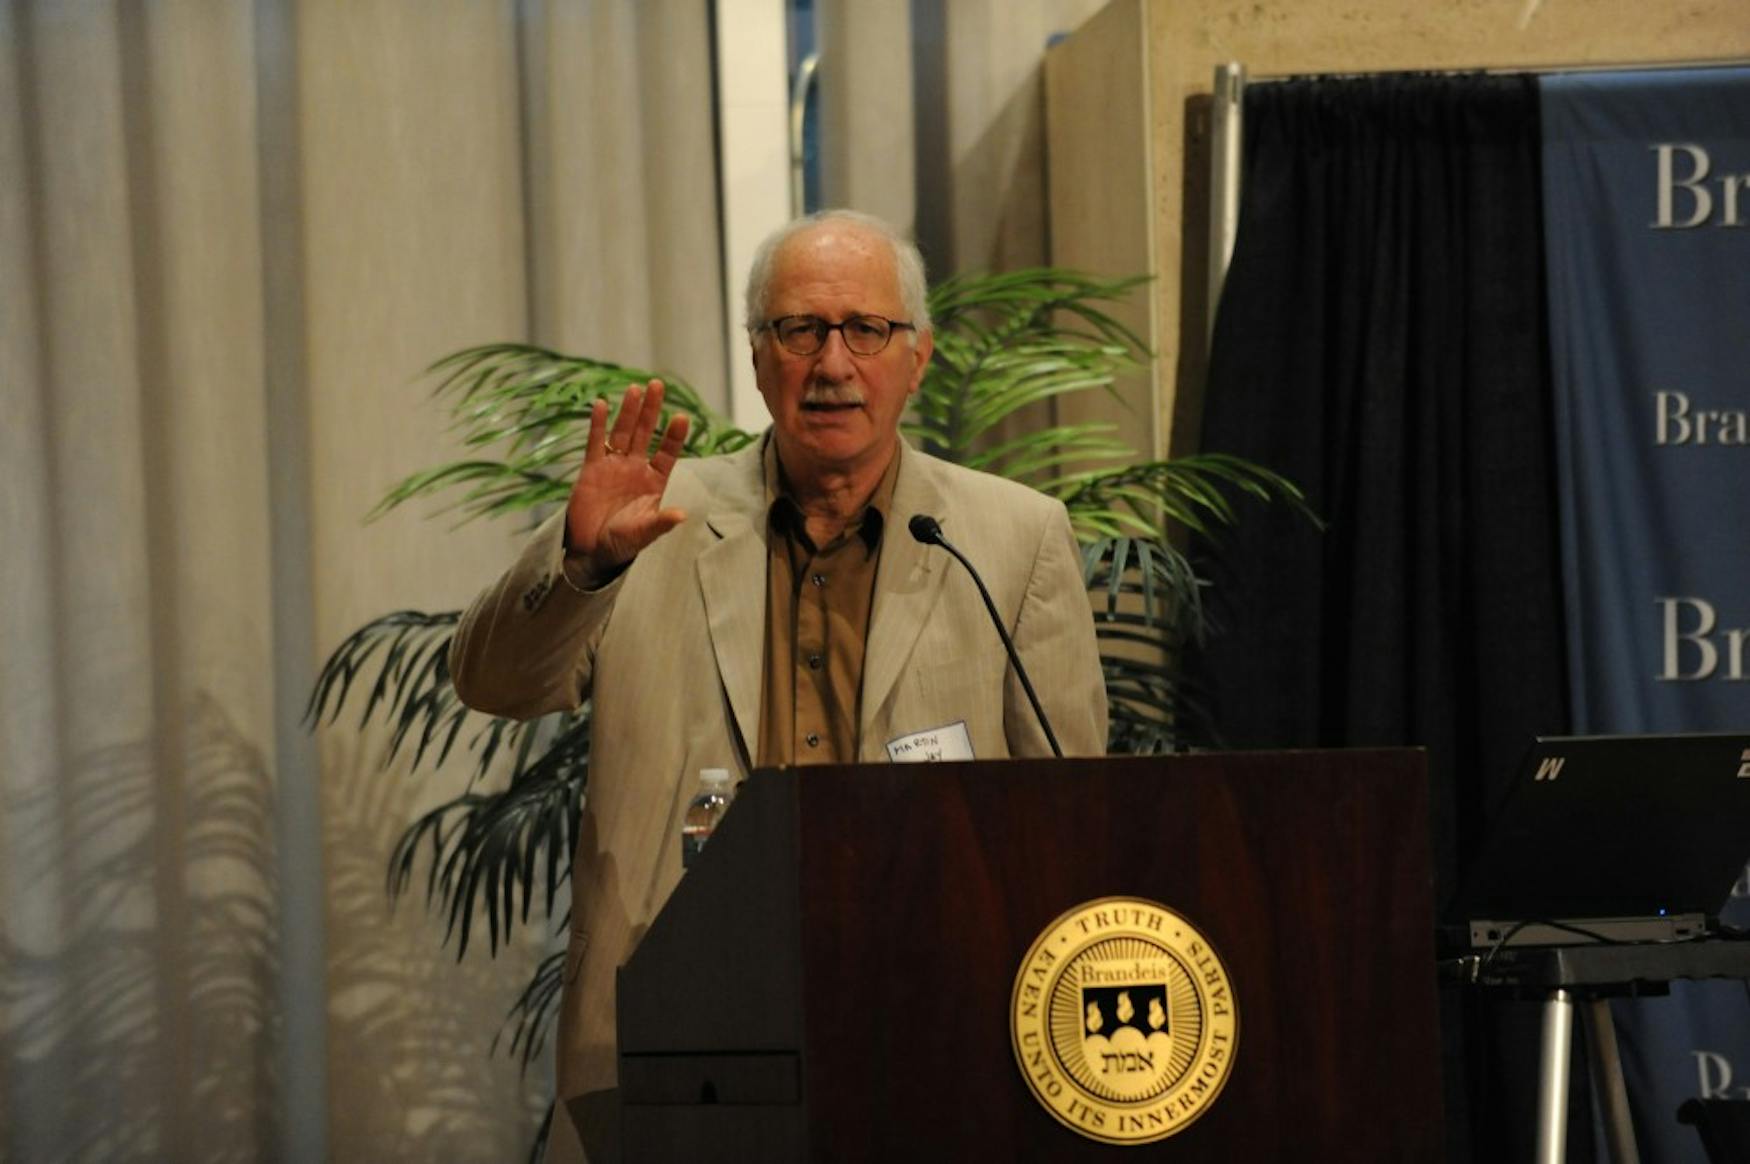 University of California, Berkeley professor and Marcuse scholar Martin Jay spoke at the Marcuse conference in the Rapaporte Treasure Hall on Wednesday.